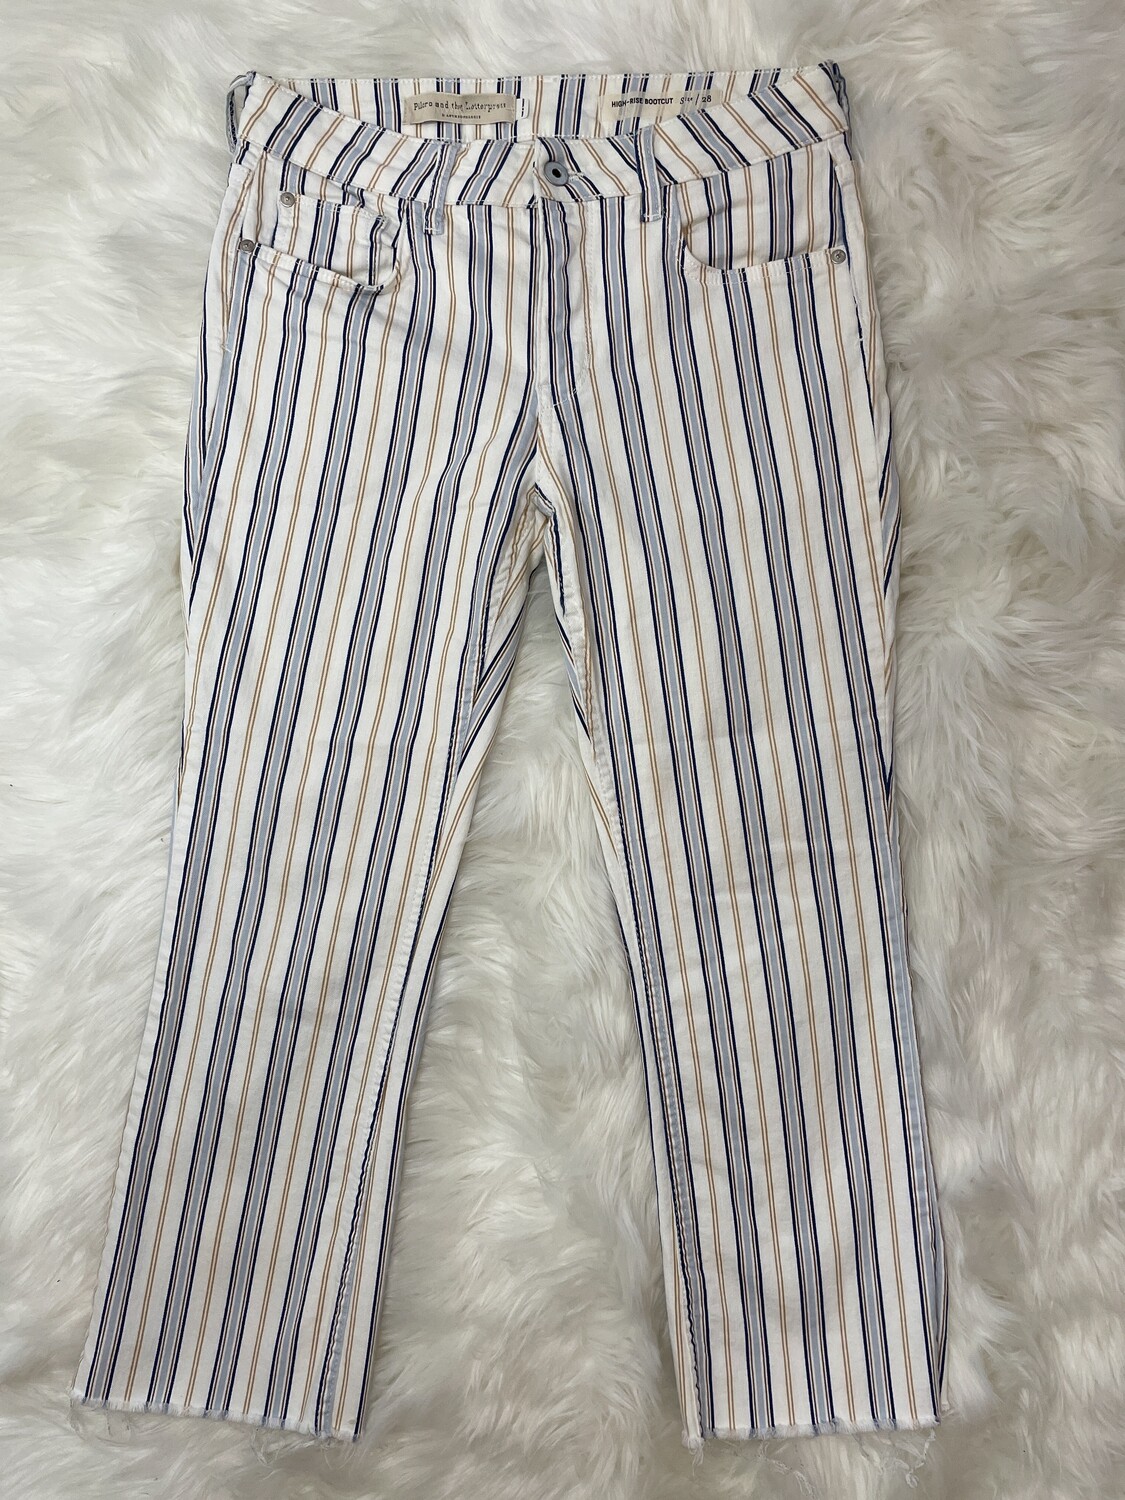 Pilcro and the Letterpress Striped High Rise Pants - Size 28